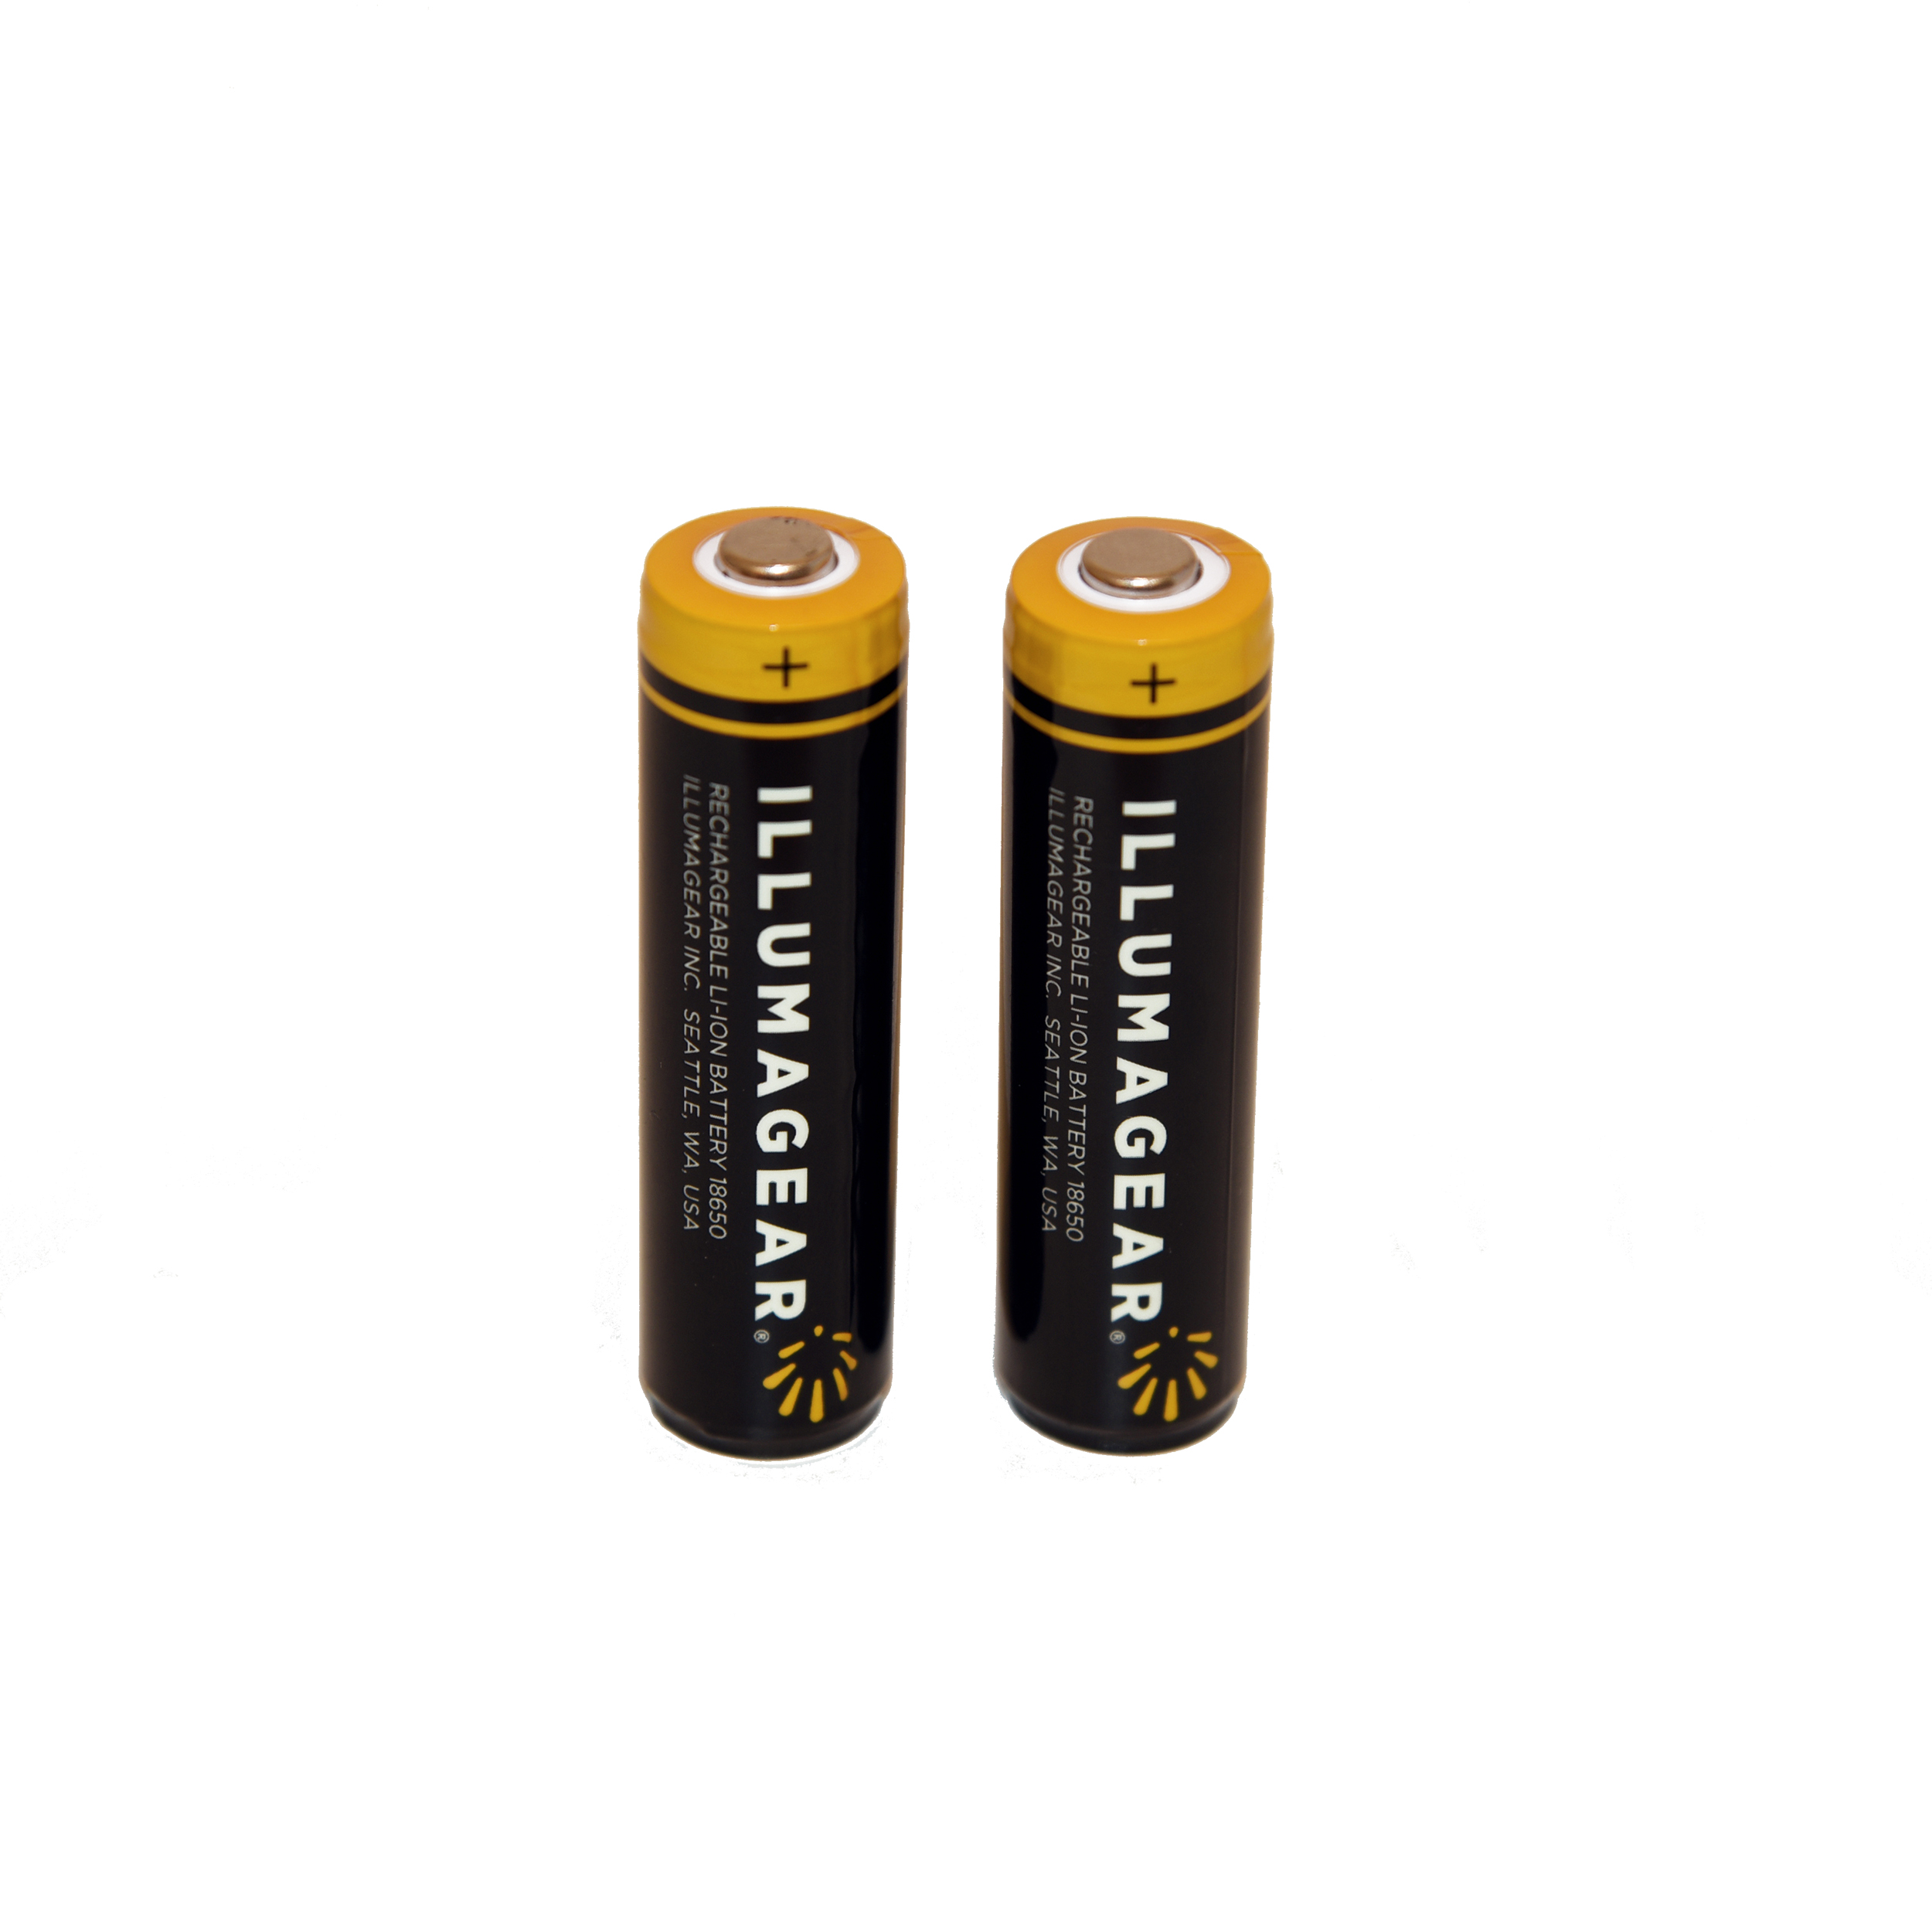 LITHIUM-ION RECHARGEABLE BATTERIES